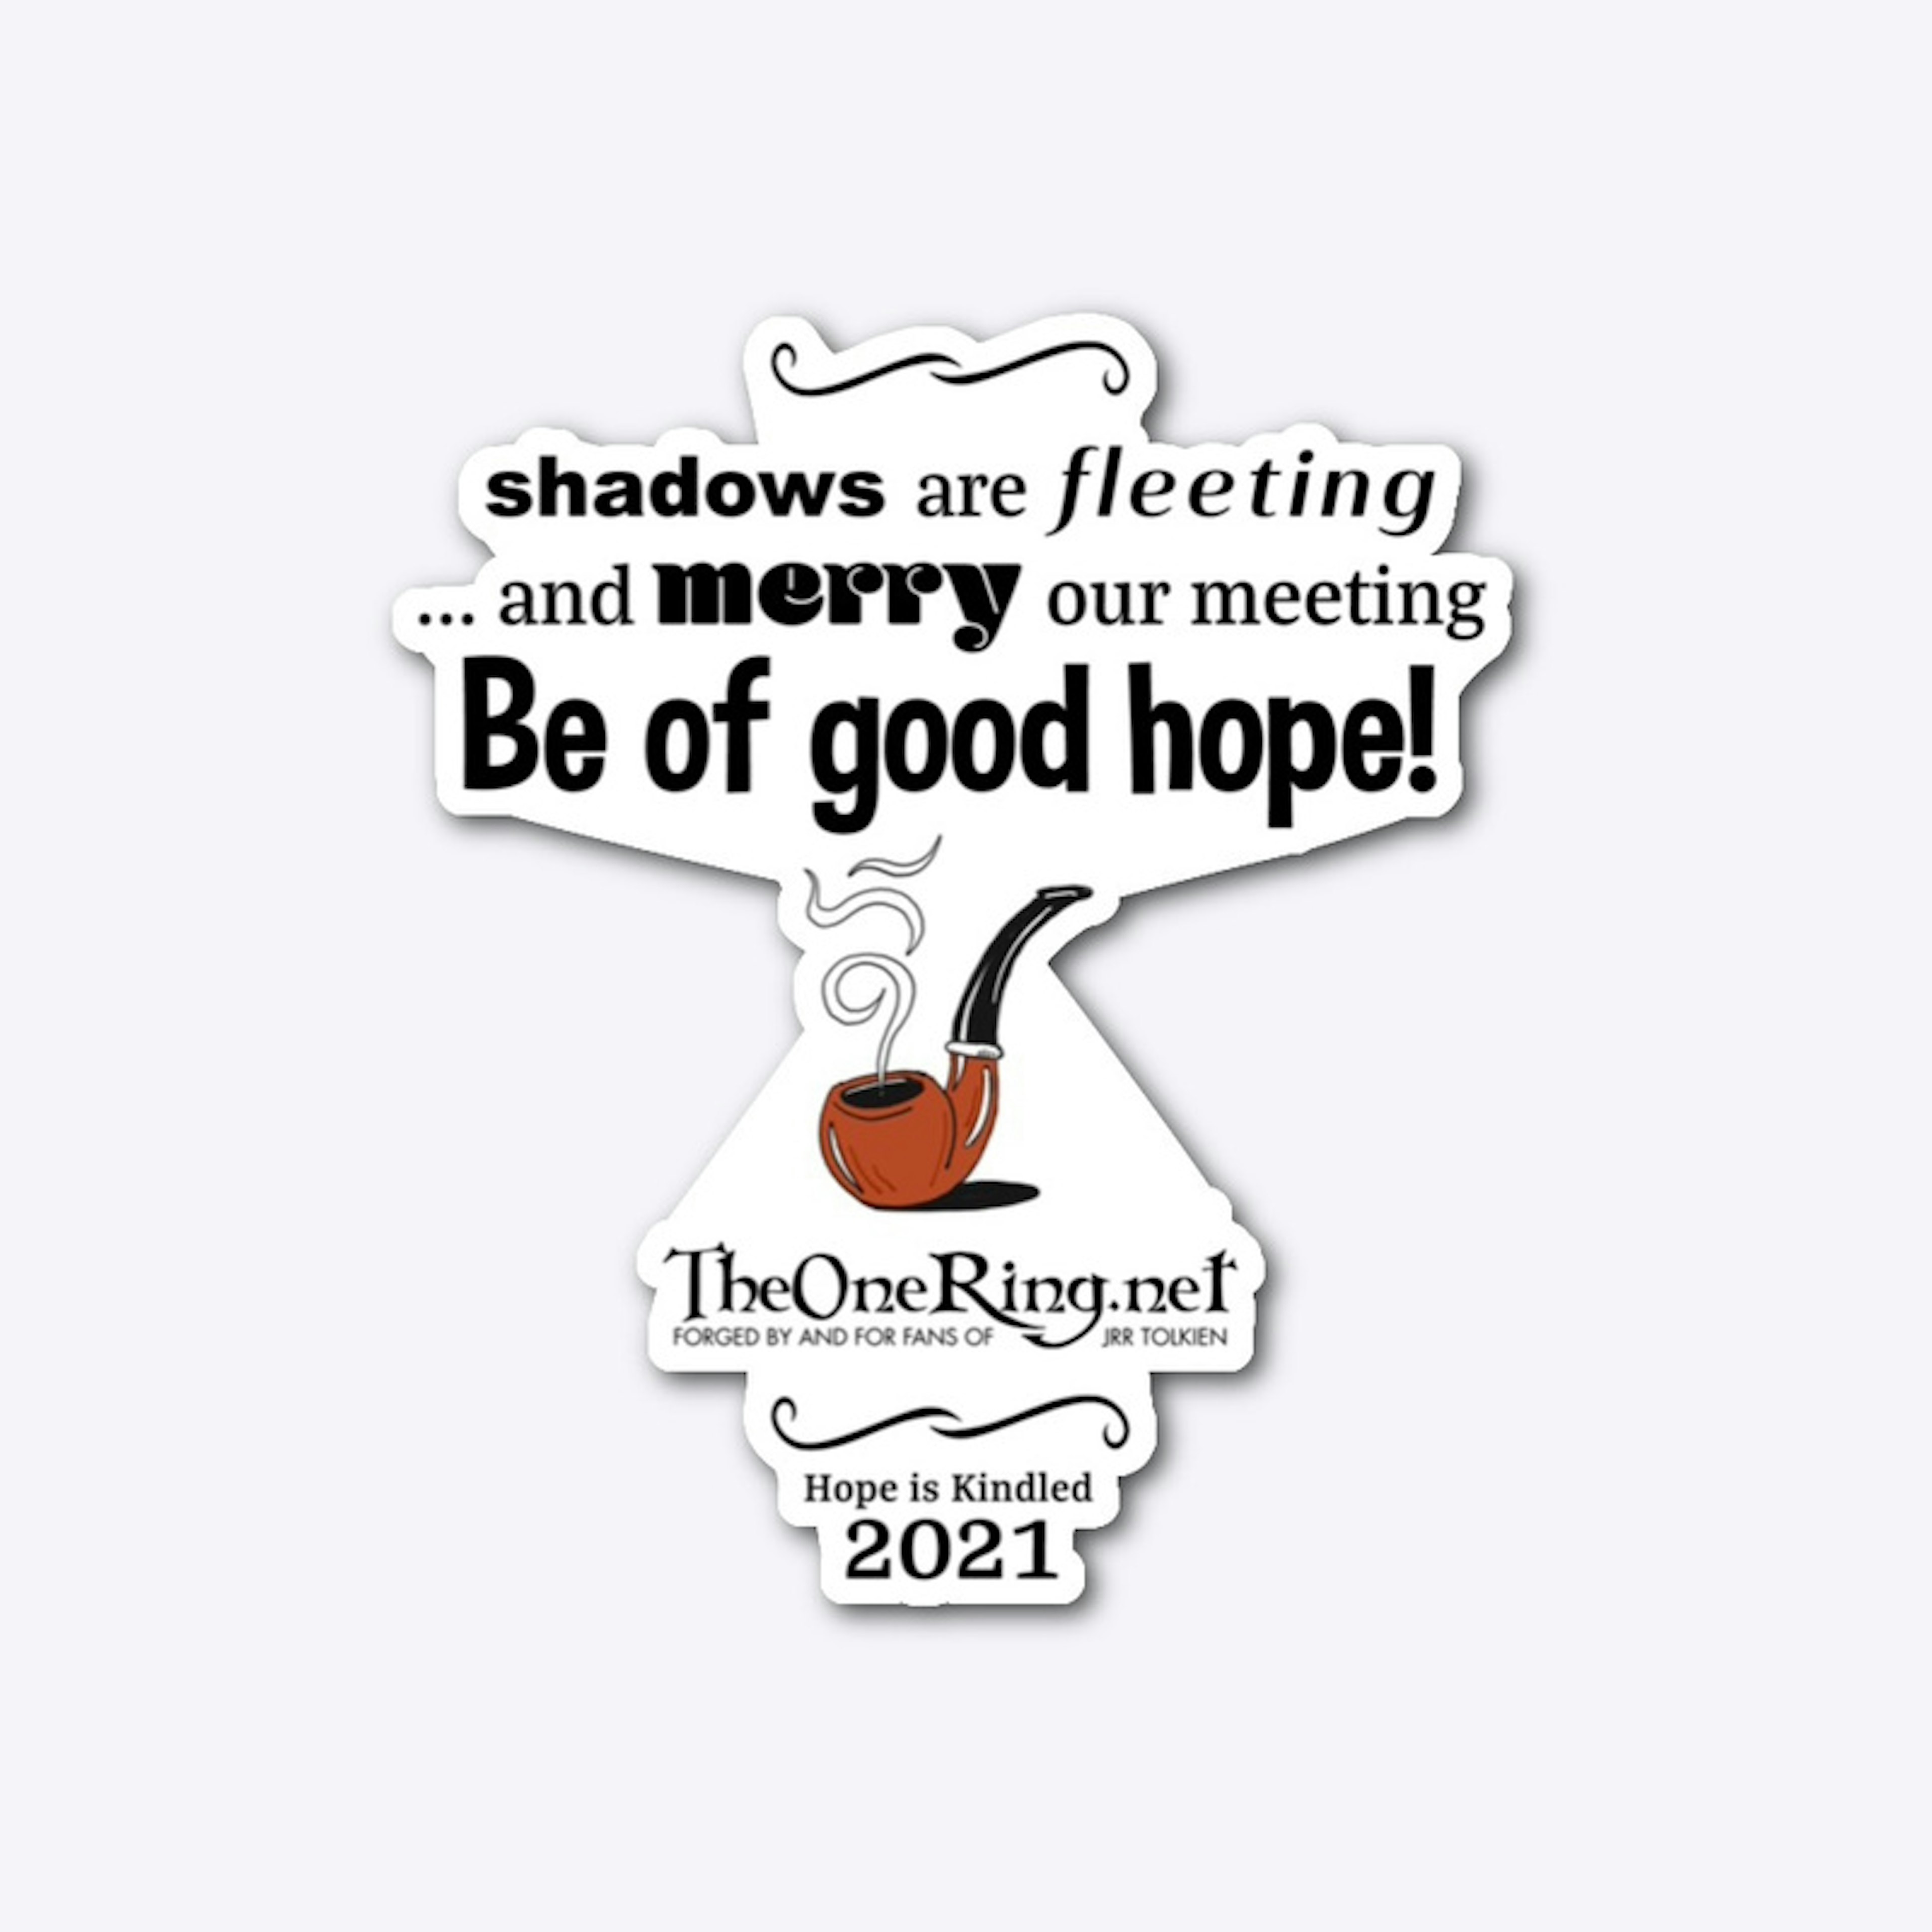 Be of Good Hope!